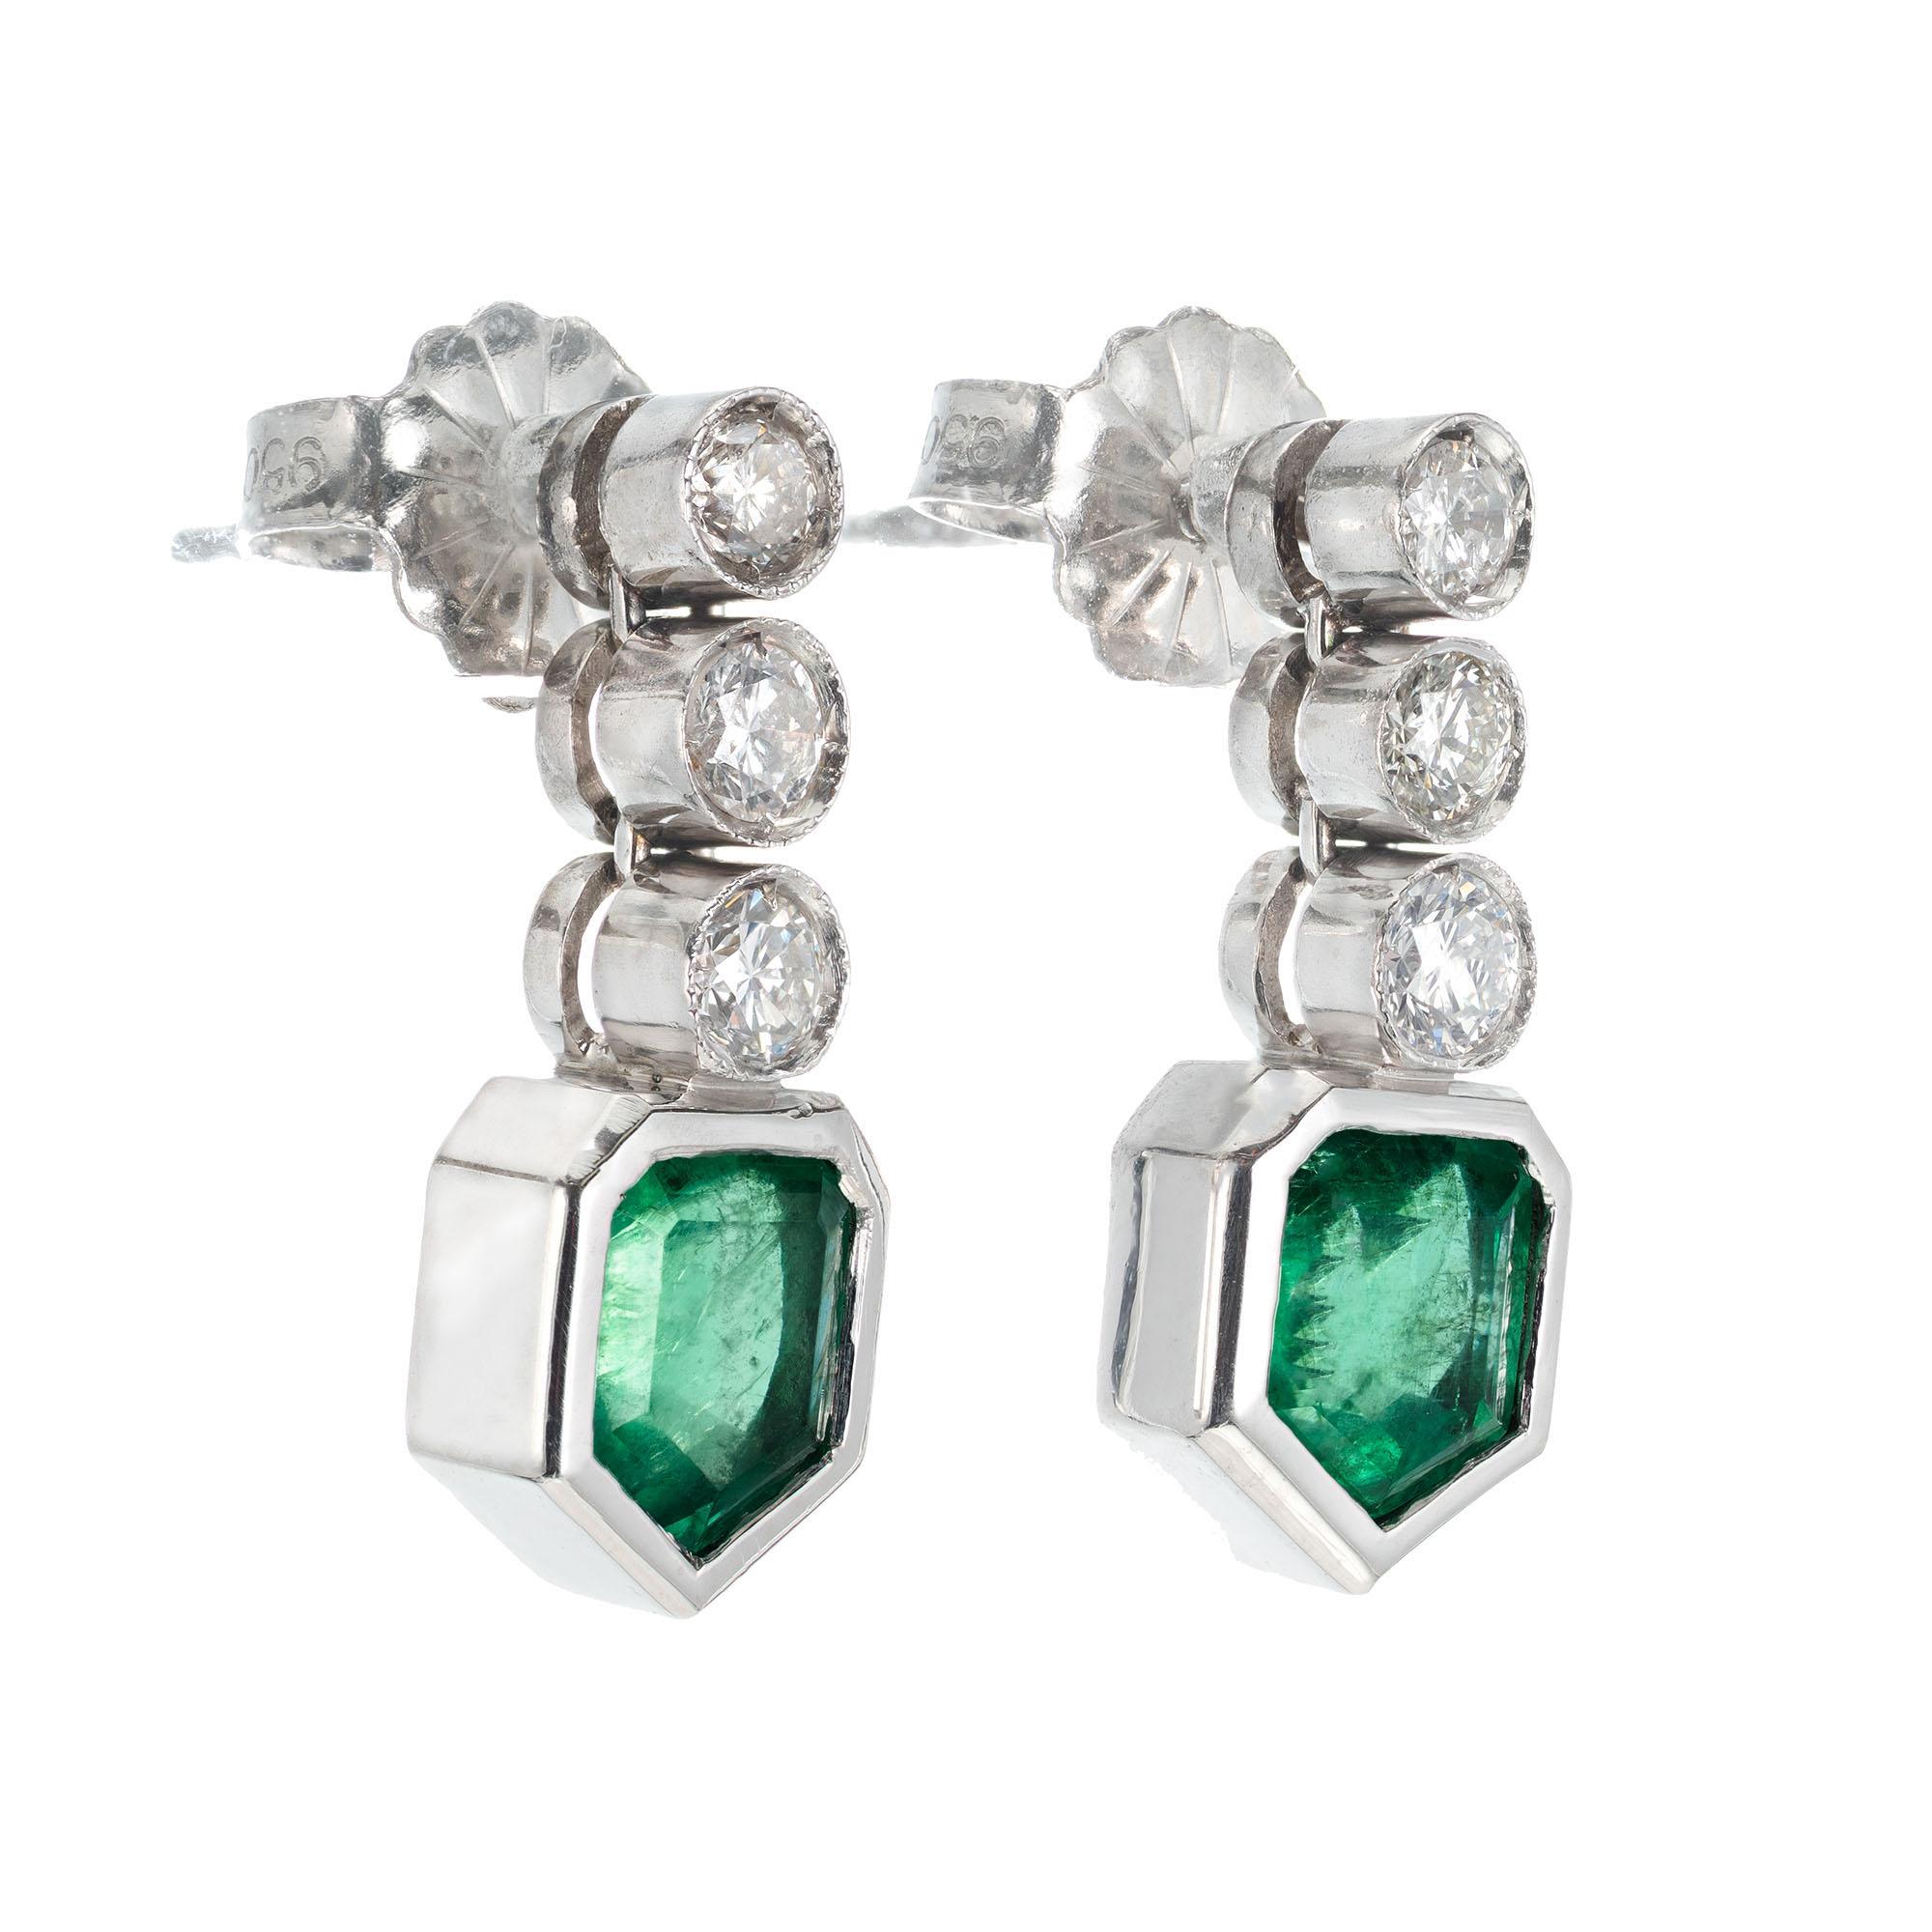 1940's emerald and diamond dangle earrings. Set in platinum with GIA certified random tested shield cut emeralds, natural beryl-emerald with moderate clarity enhancement accented with 6 round brilliant cut diamonds. 

2 shield cut green emeralds F2,